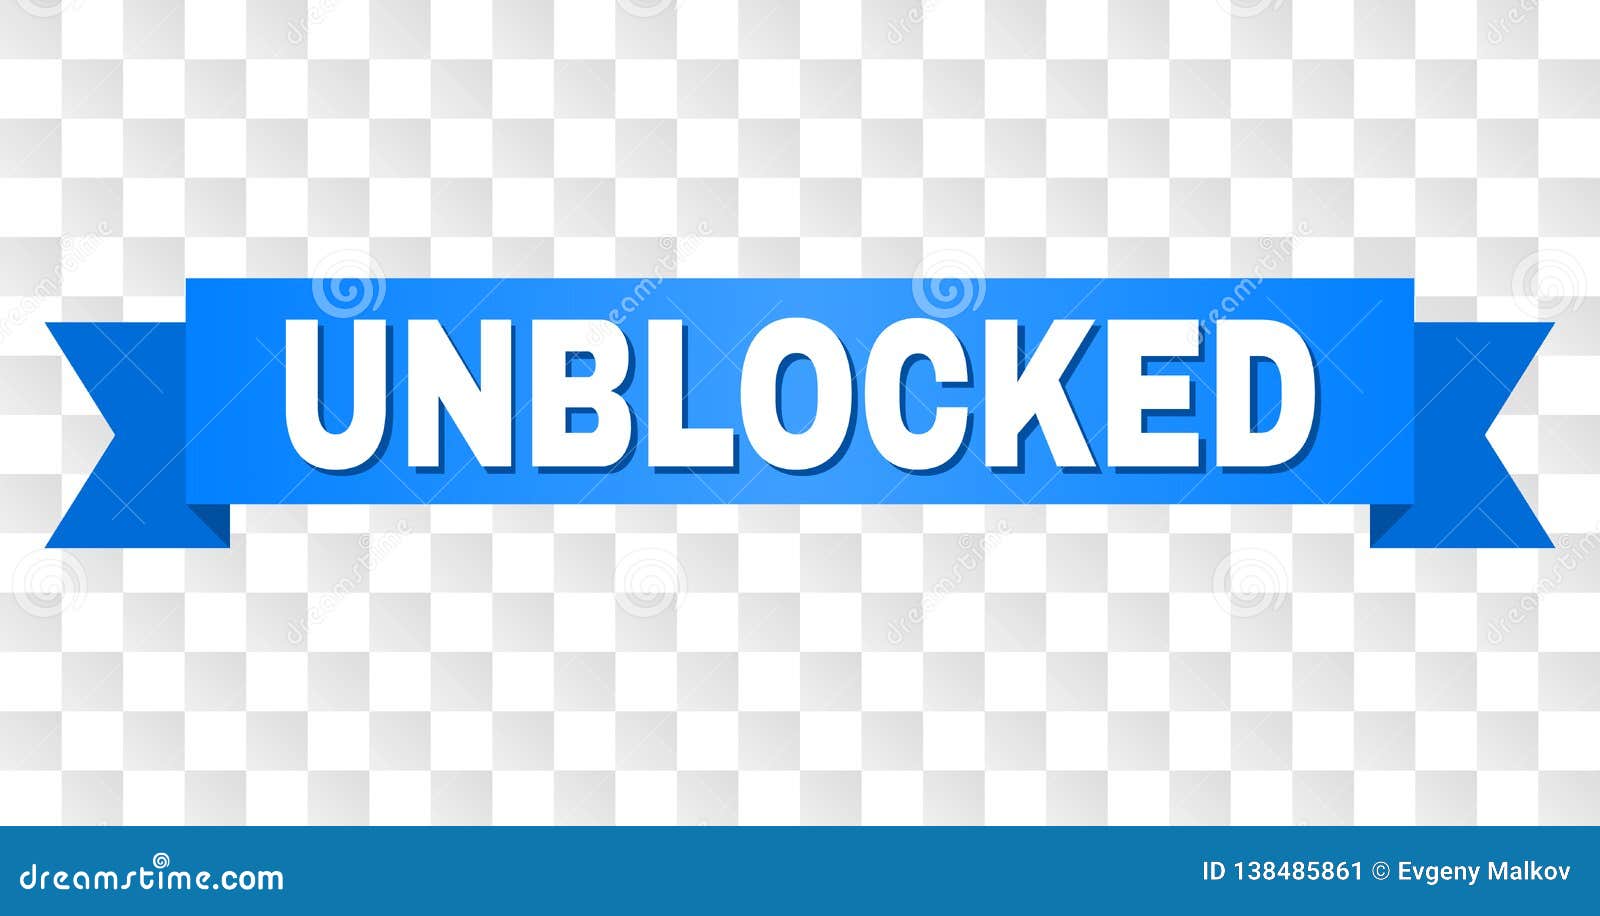 Unblocked Games - Tag